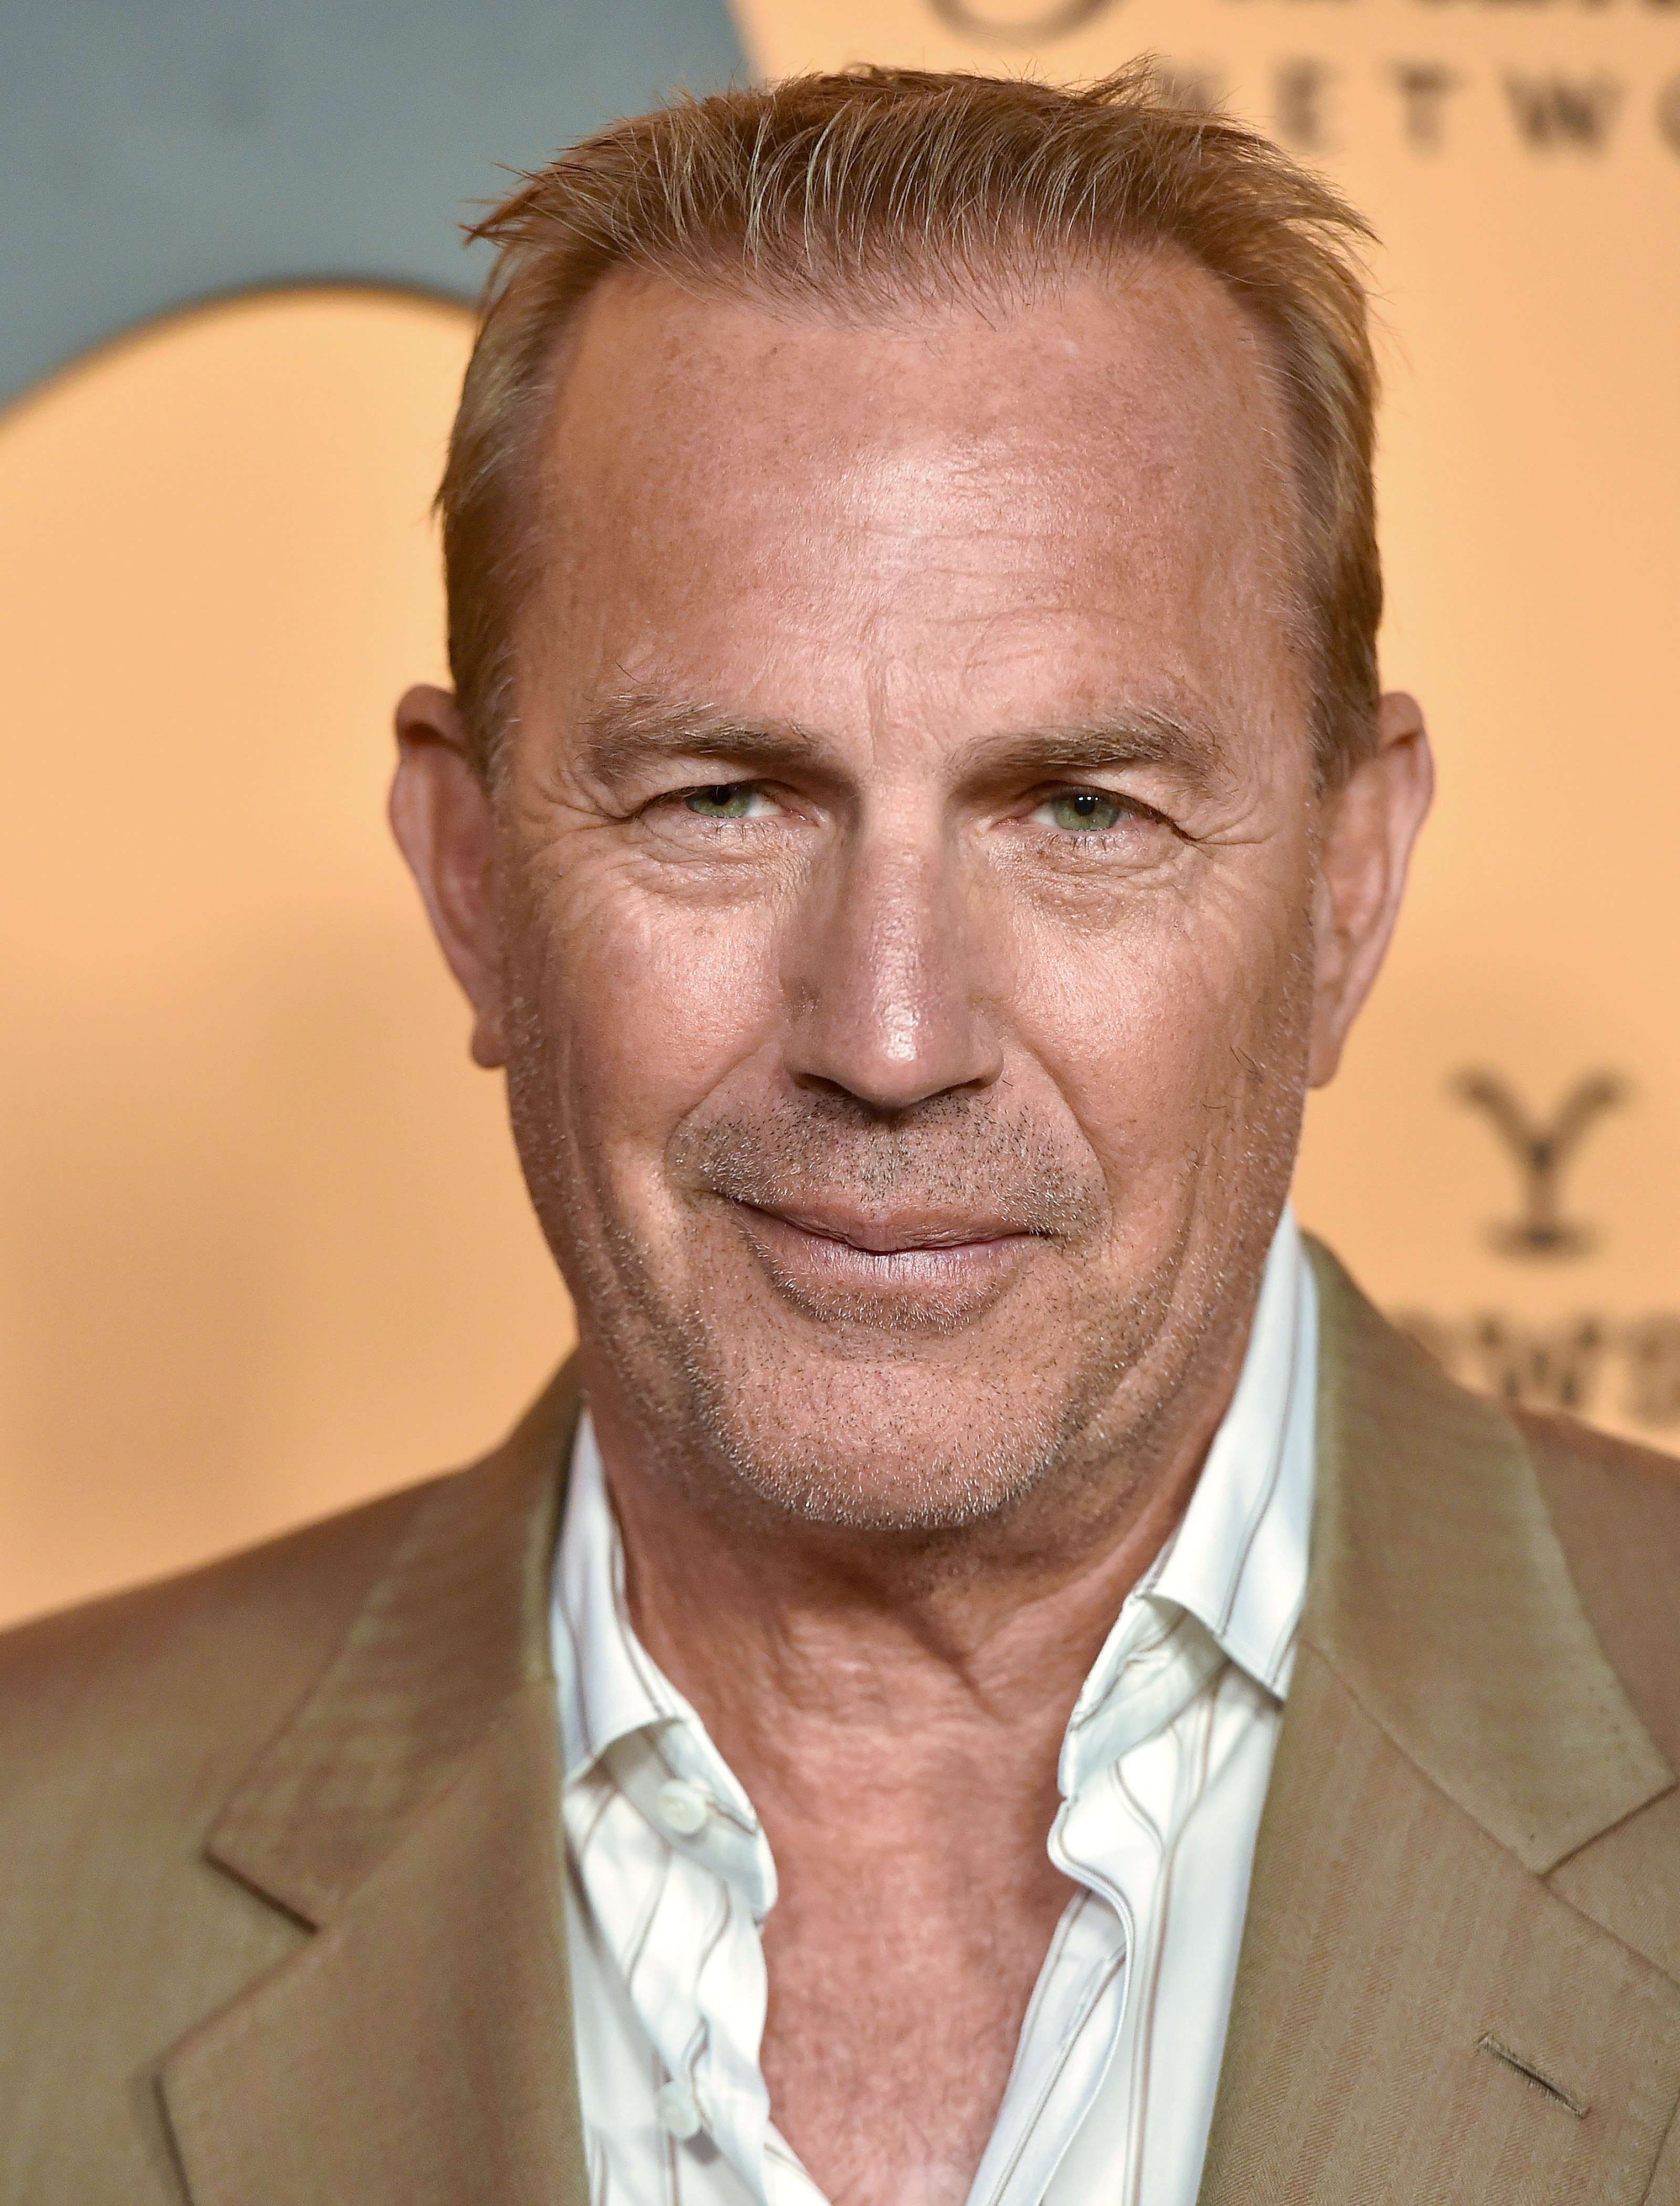 Kevin Costner at the premiere party for "Yellowstone" season 2 on May 30, 2019, in Los Angeles, California | Source: Getty Images